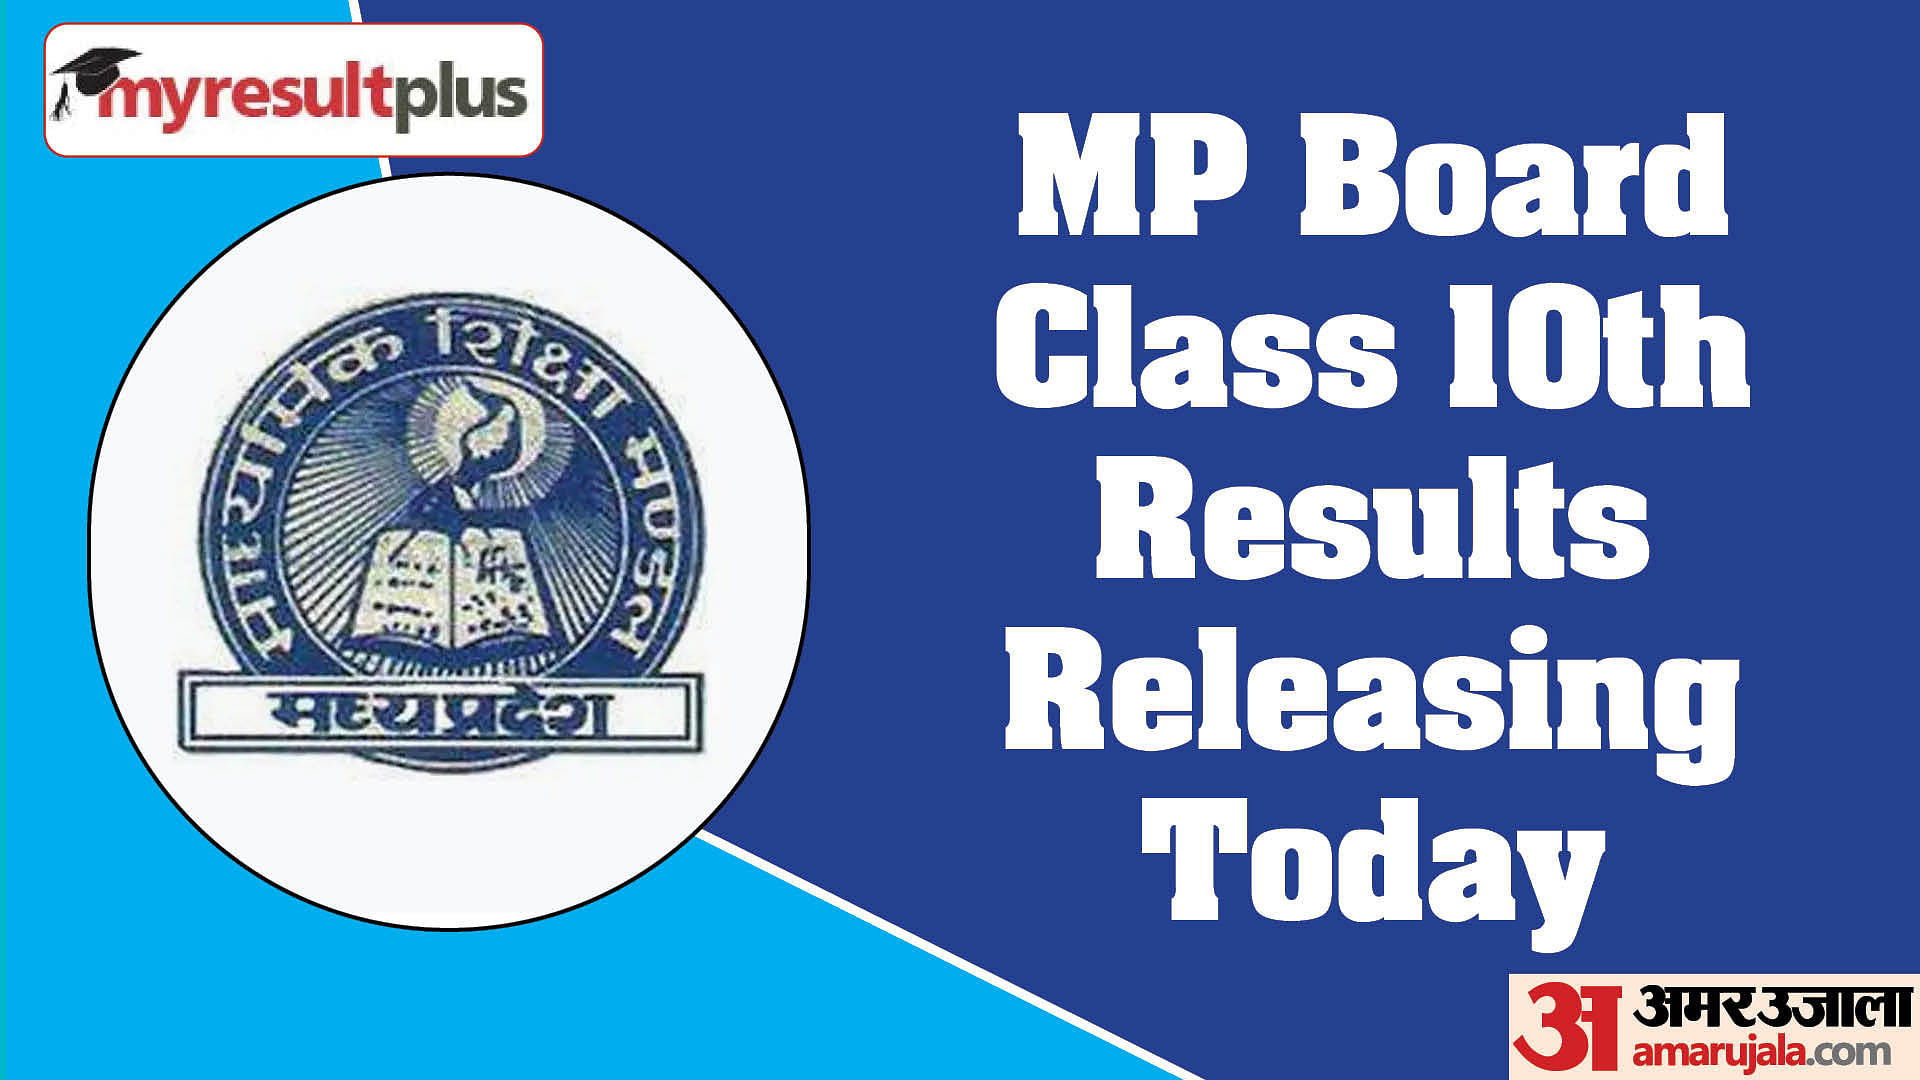 MPBSE has released the MP Board Class 10th Results, Check your results at results.amarujala.com